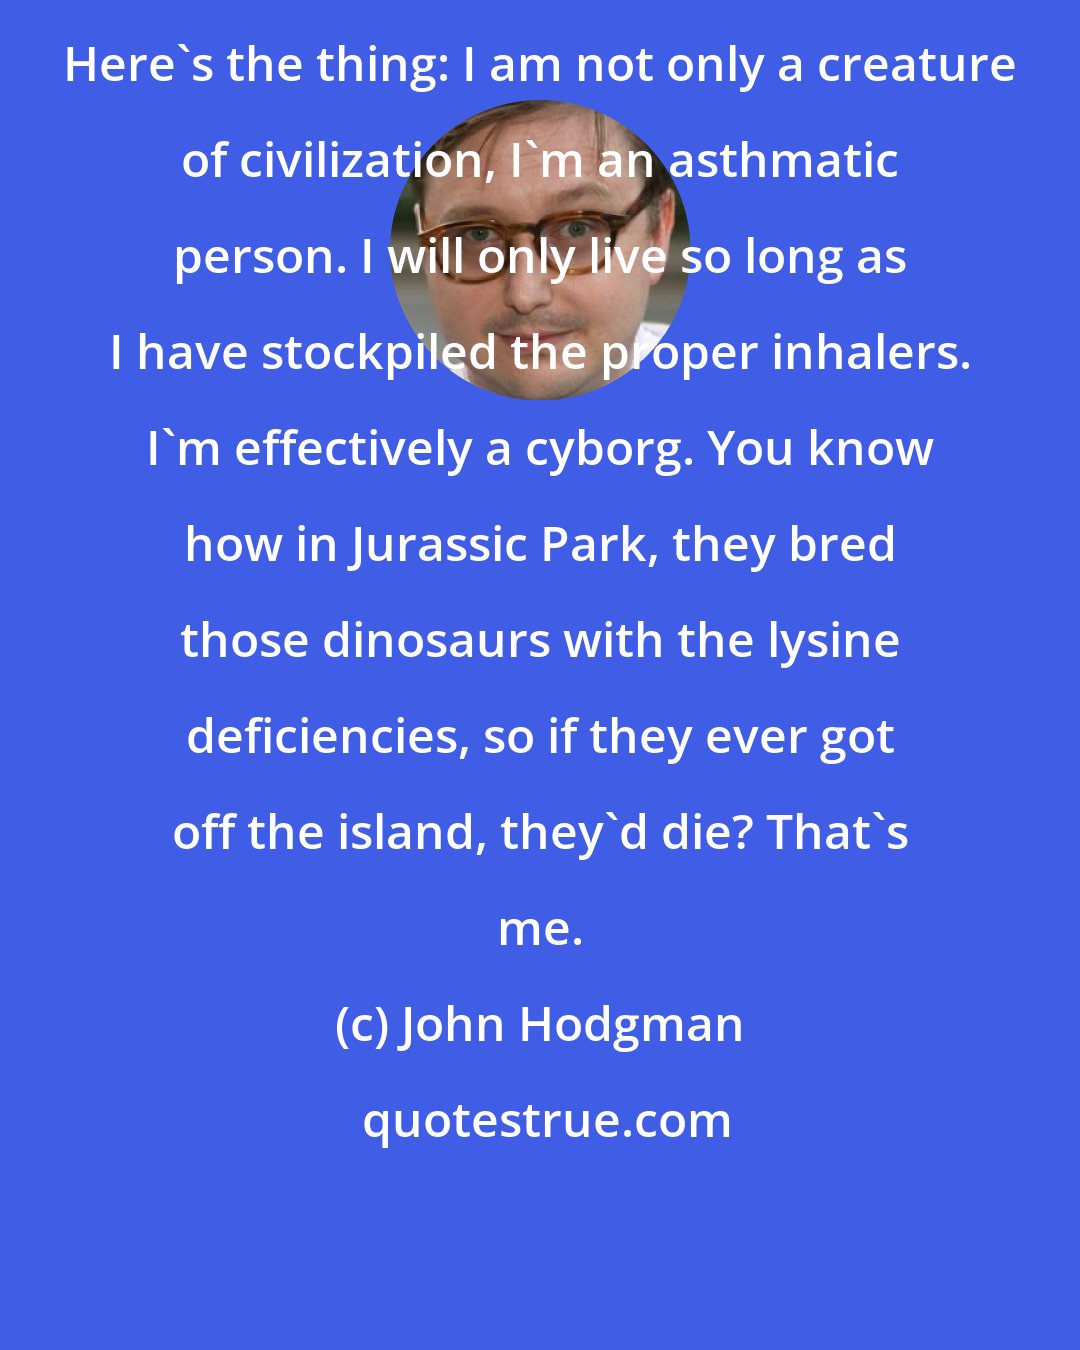 John Hodgman: Here's the thing: I am not only a creature of civilization, I'm an asthmatic person. I will only live so long as I have stockpiled the proper inhalers. I'm effectively a cyborg. You know how in Jurassic Park, they bred those dinosaurs with the lysine deficiencies, so if they ever got off the island, they'd die? That's me.